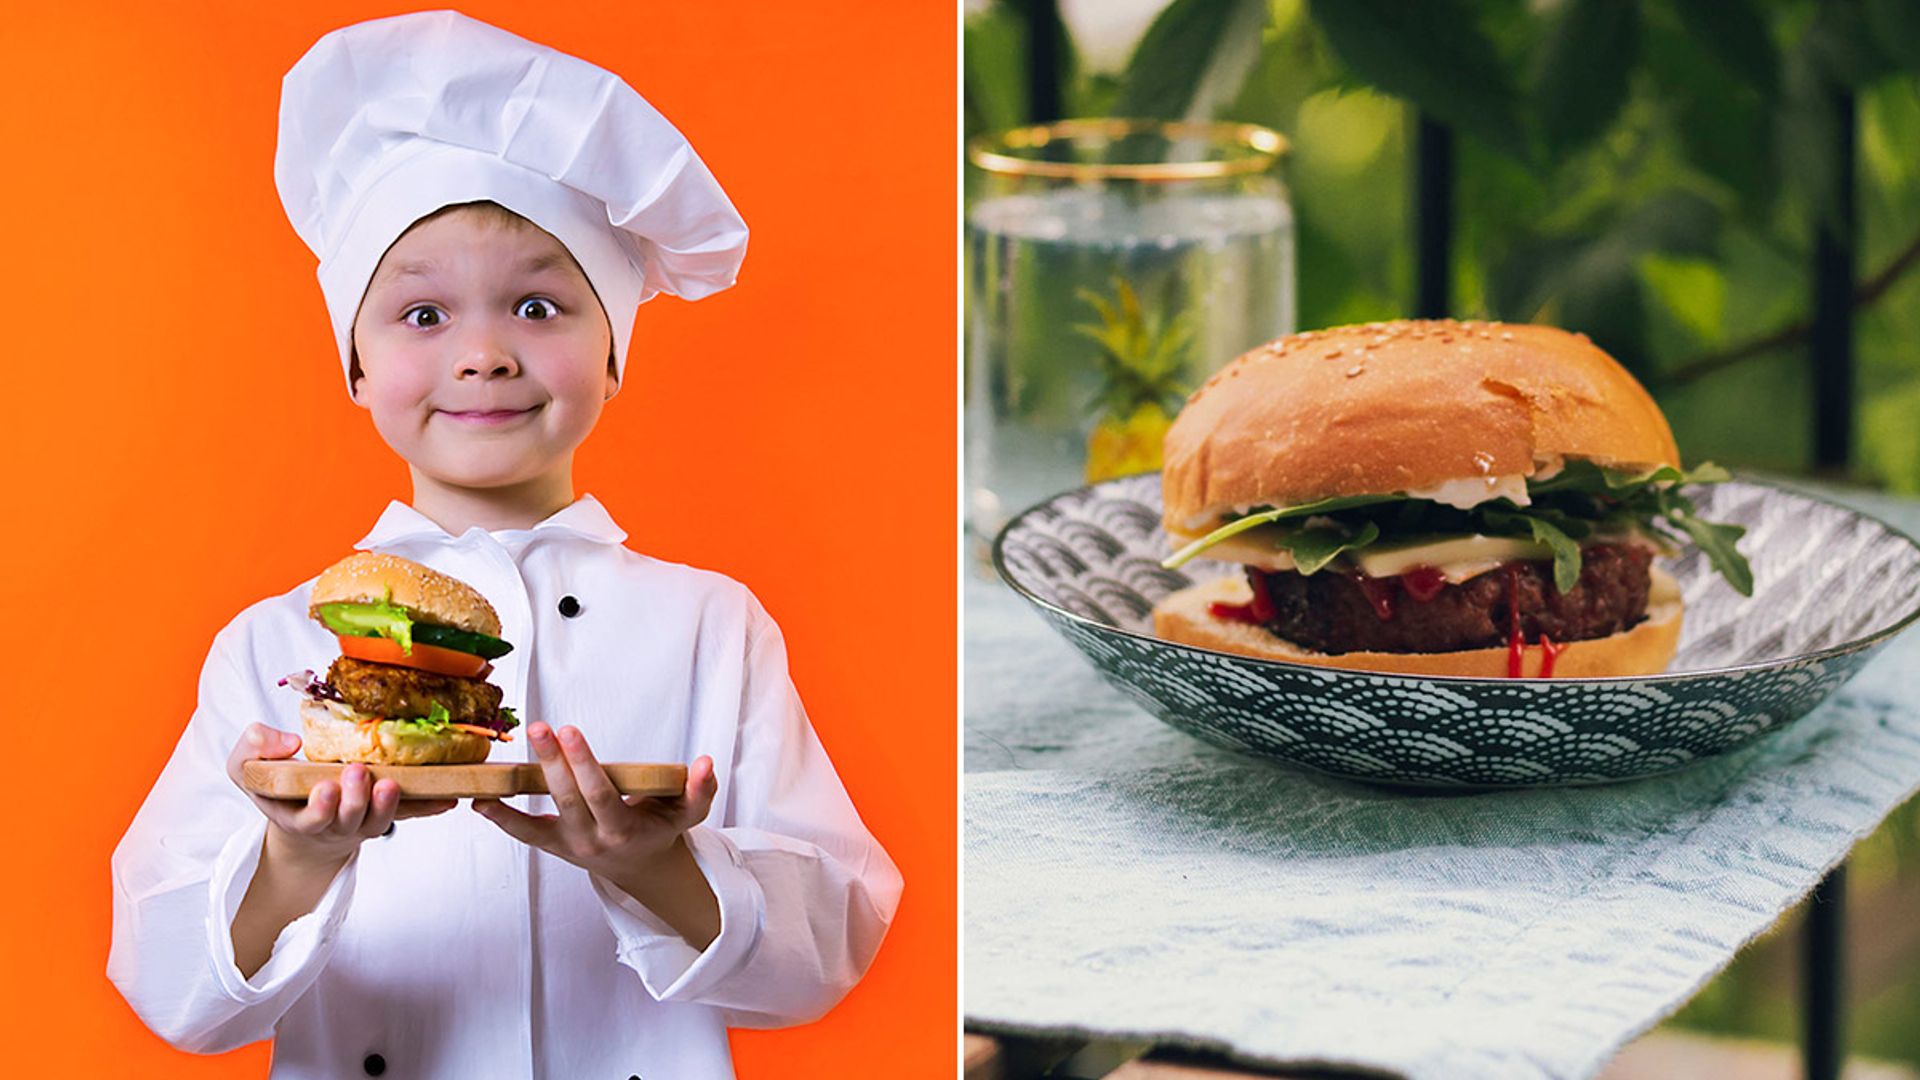 This BBQ burger recipe is fun for kids to make in lockdown – and so easy